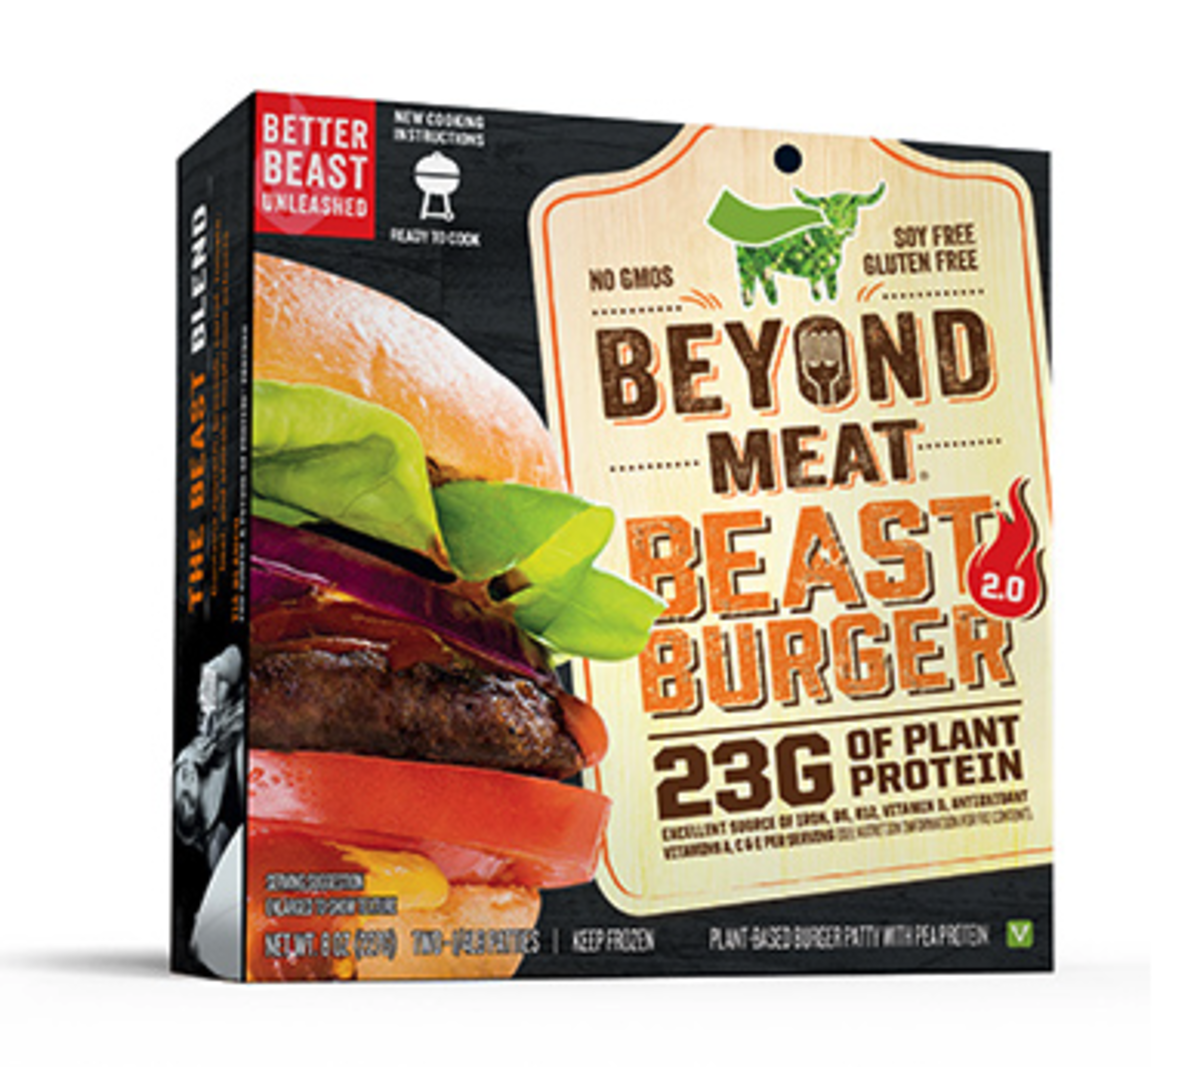 The Beyond Meat Beast Burger is a strong contender.